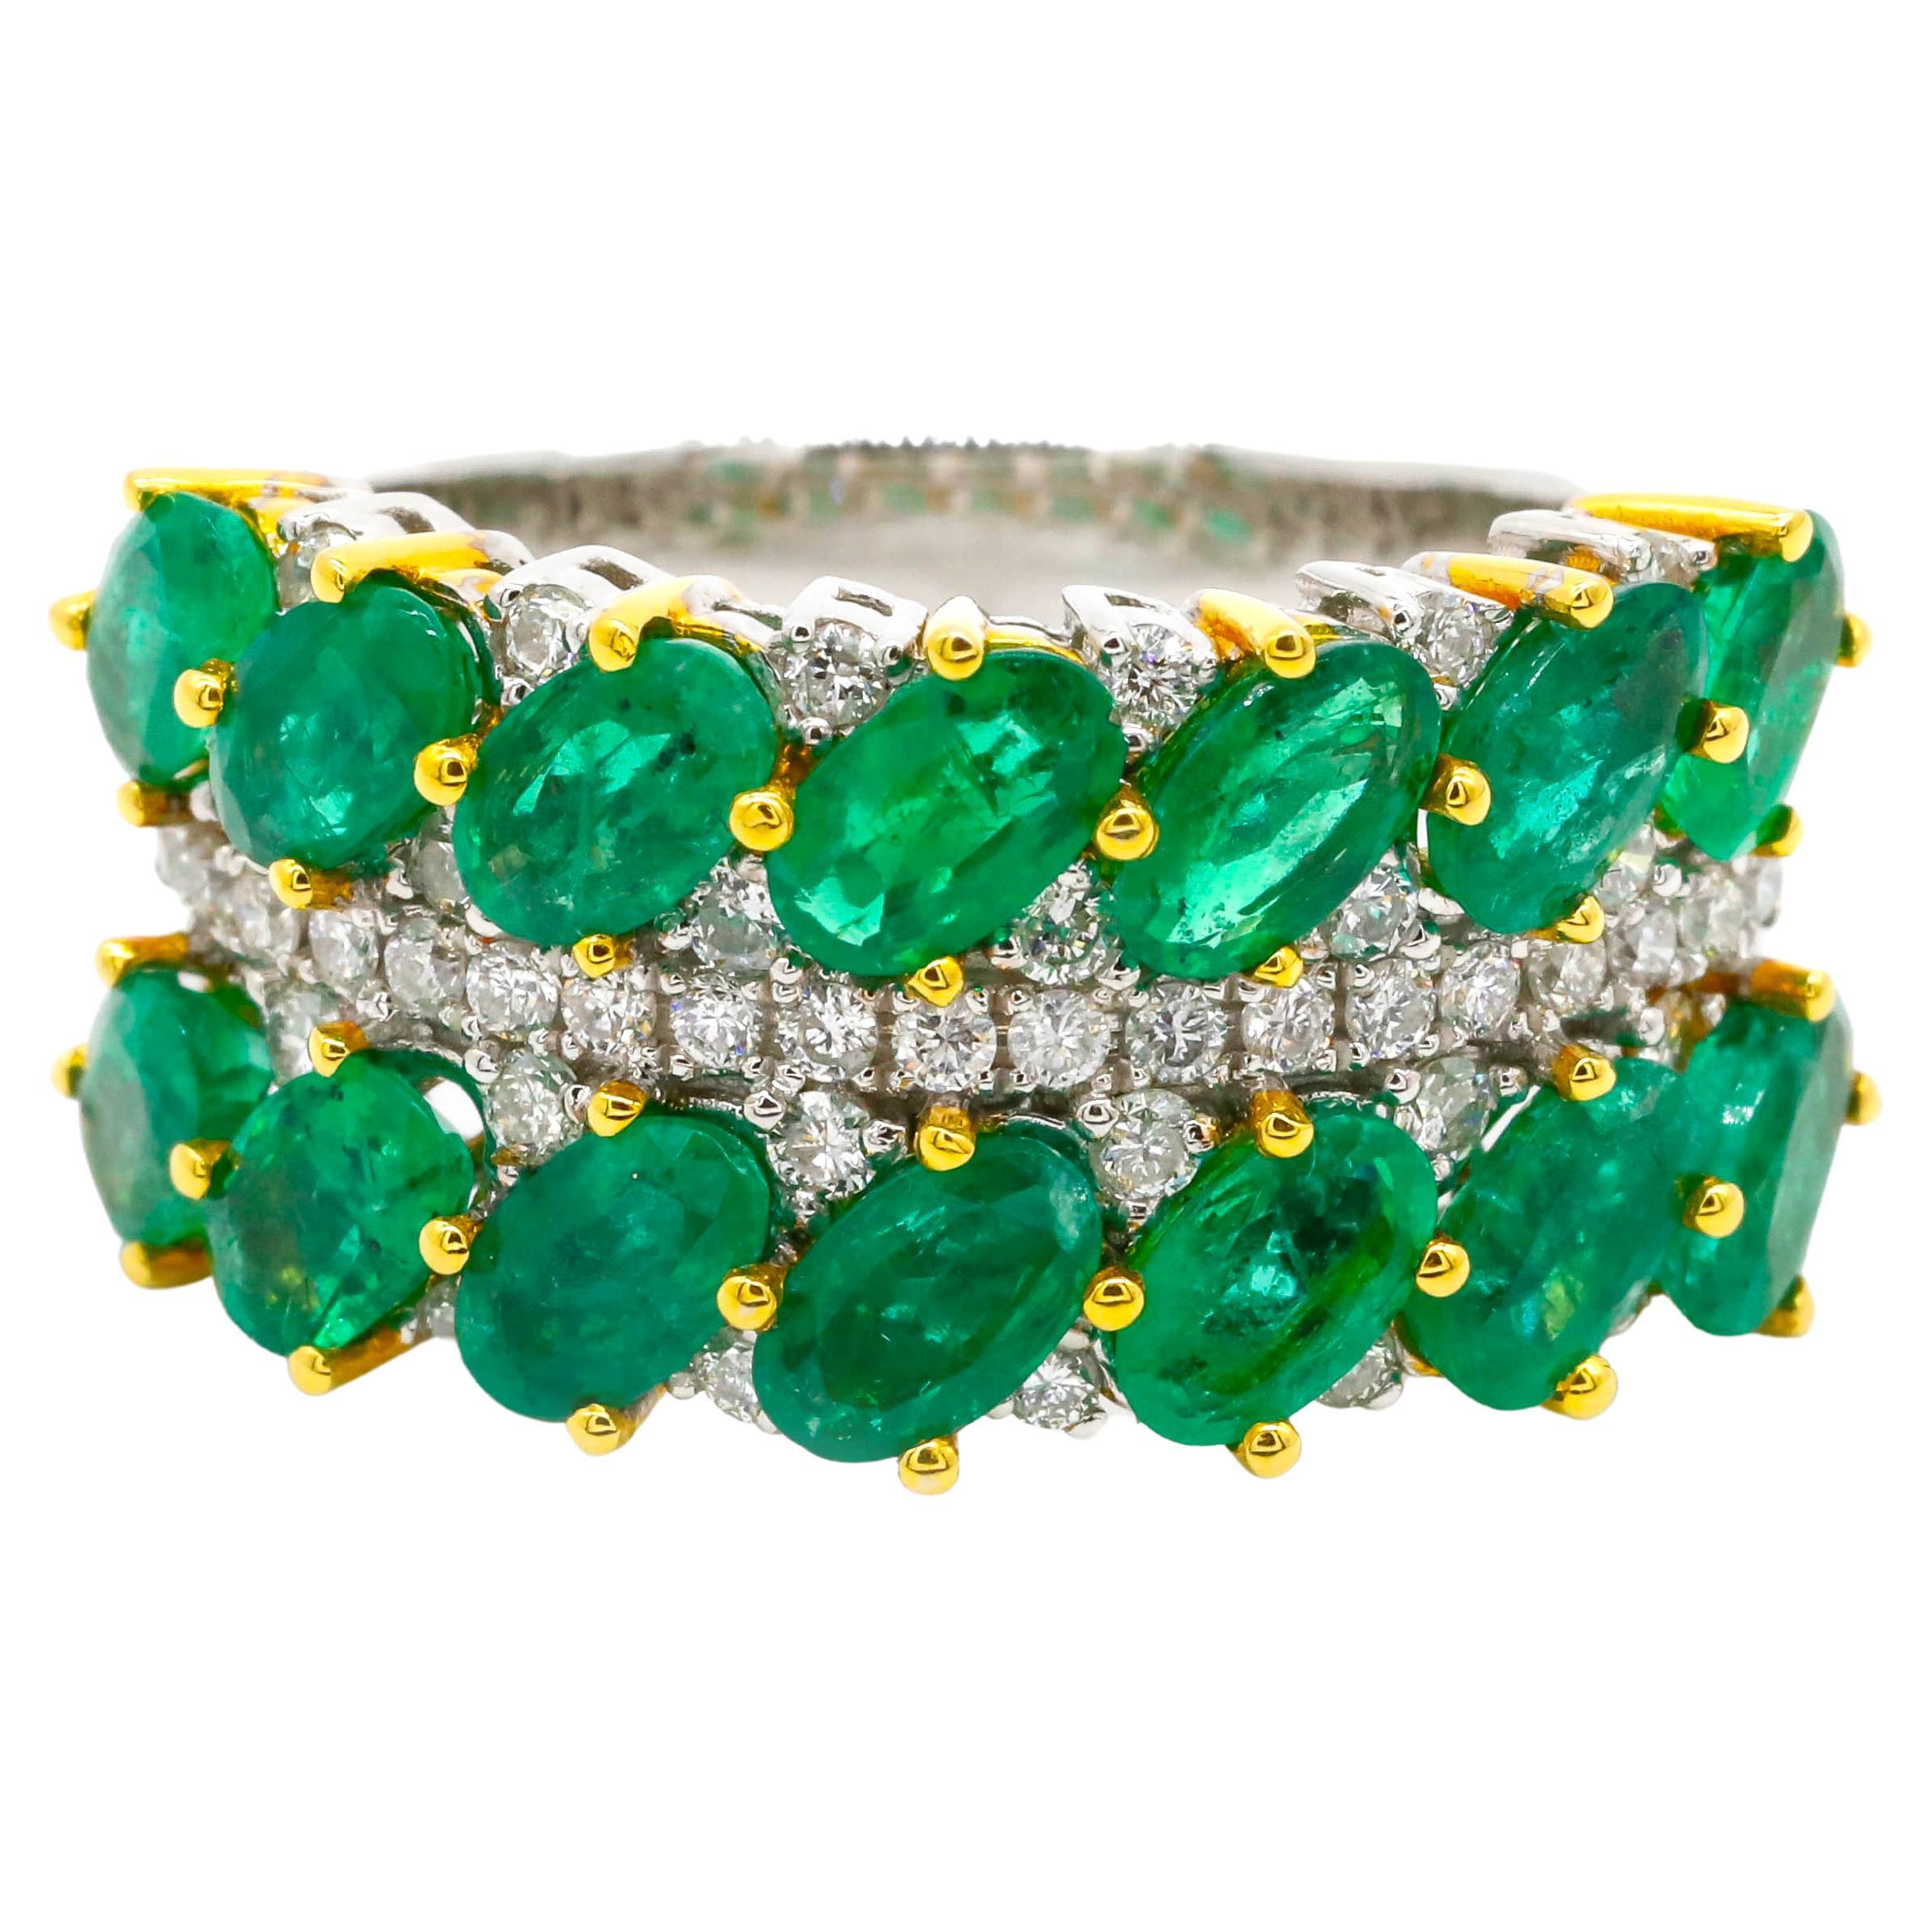 2.69 Carat Oval Cut Emerald and Round Diamond Cocktail Ring in 18k Two ...